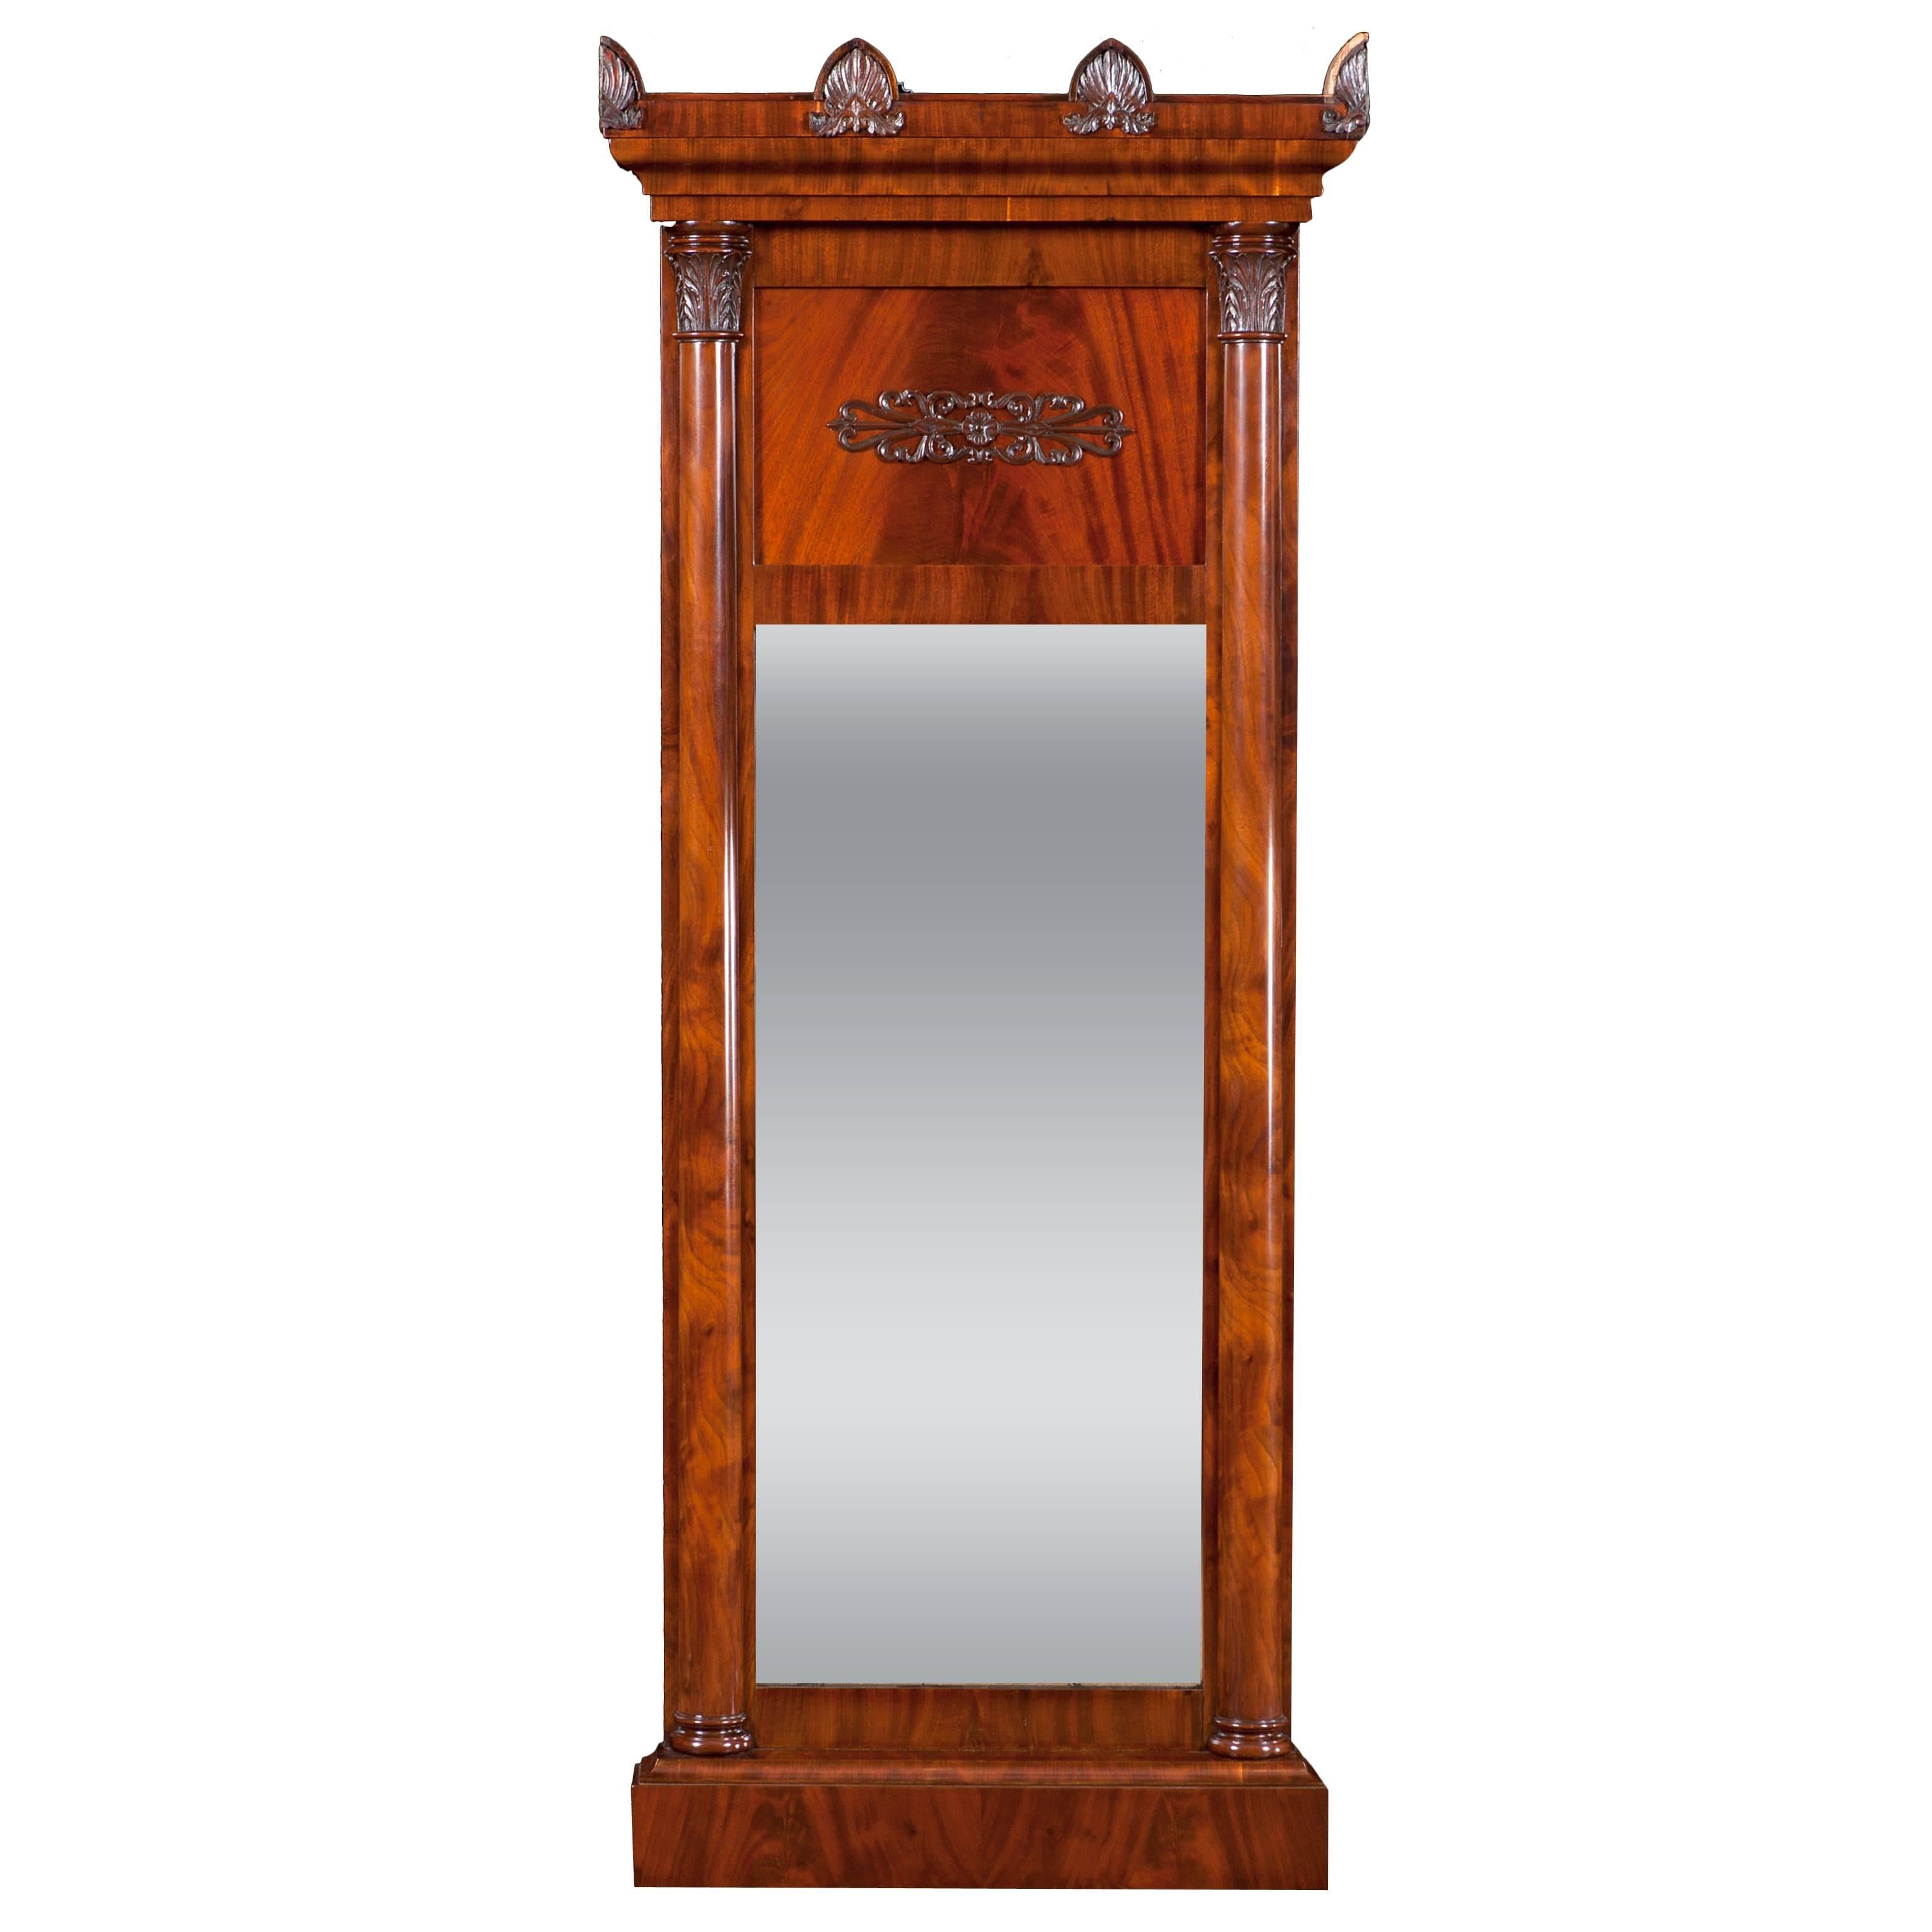 Large Empire Mirror in Cuban Mahogany with Columns and Carved Capitals, c. 1810 For Sale